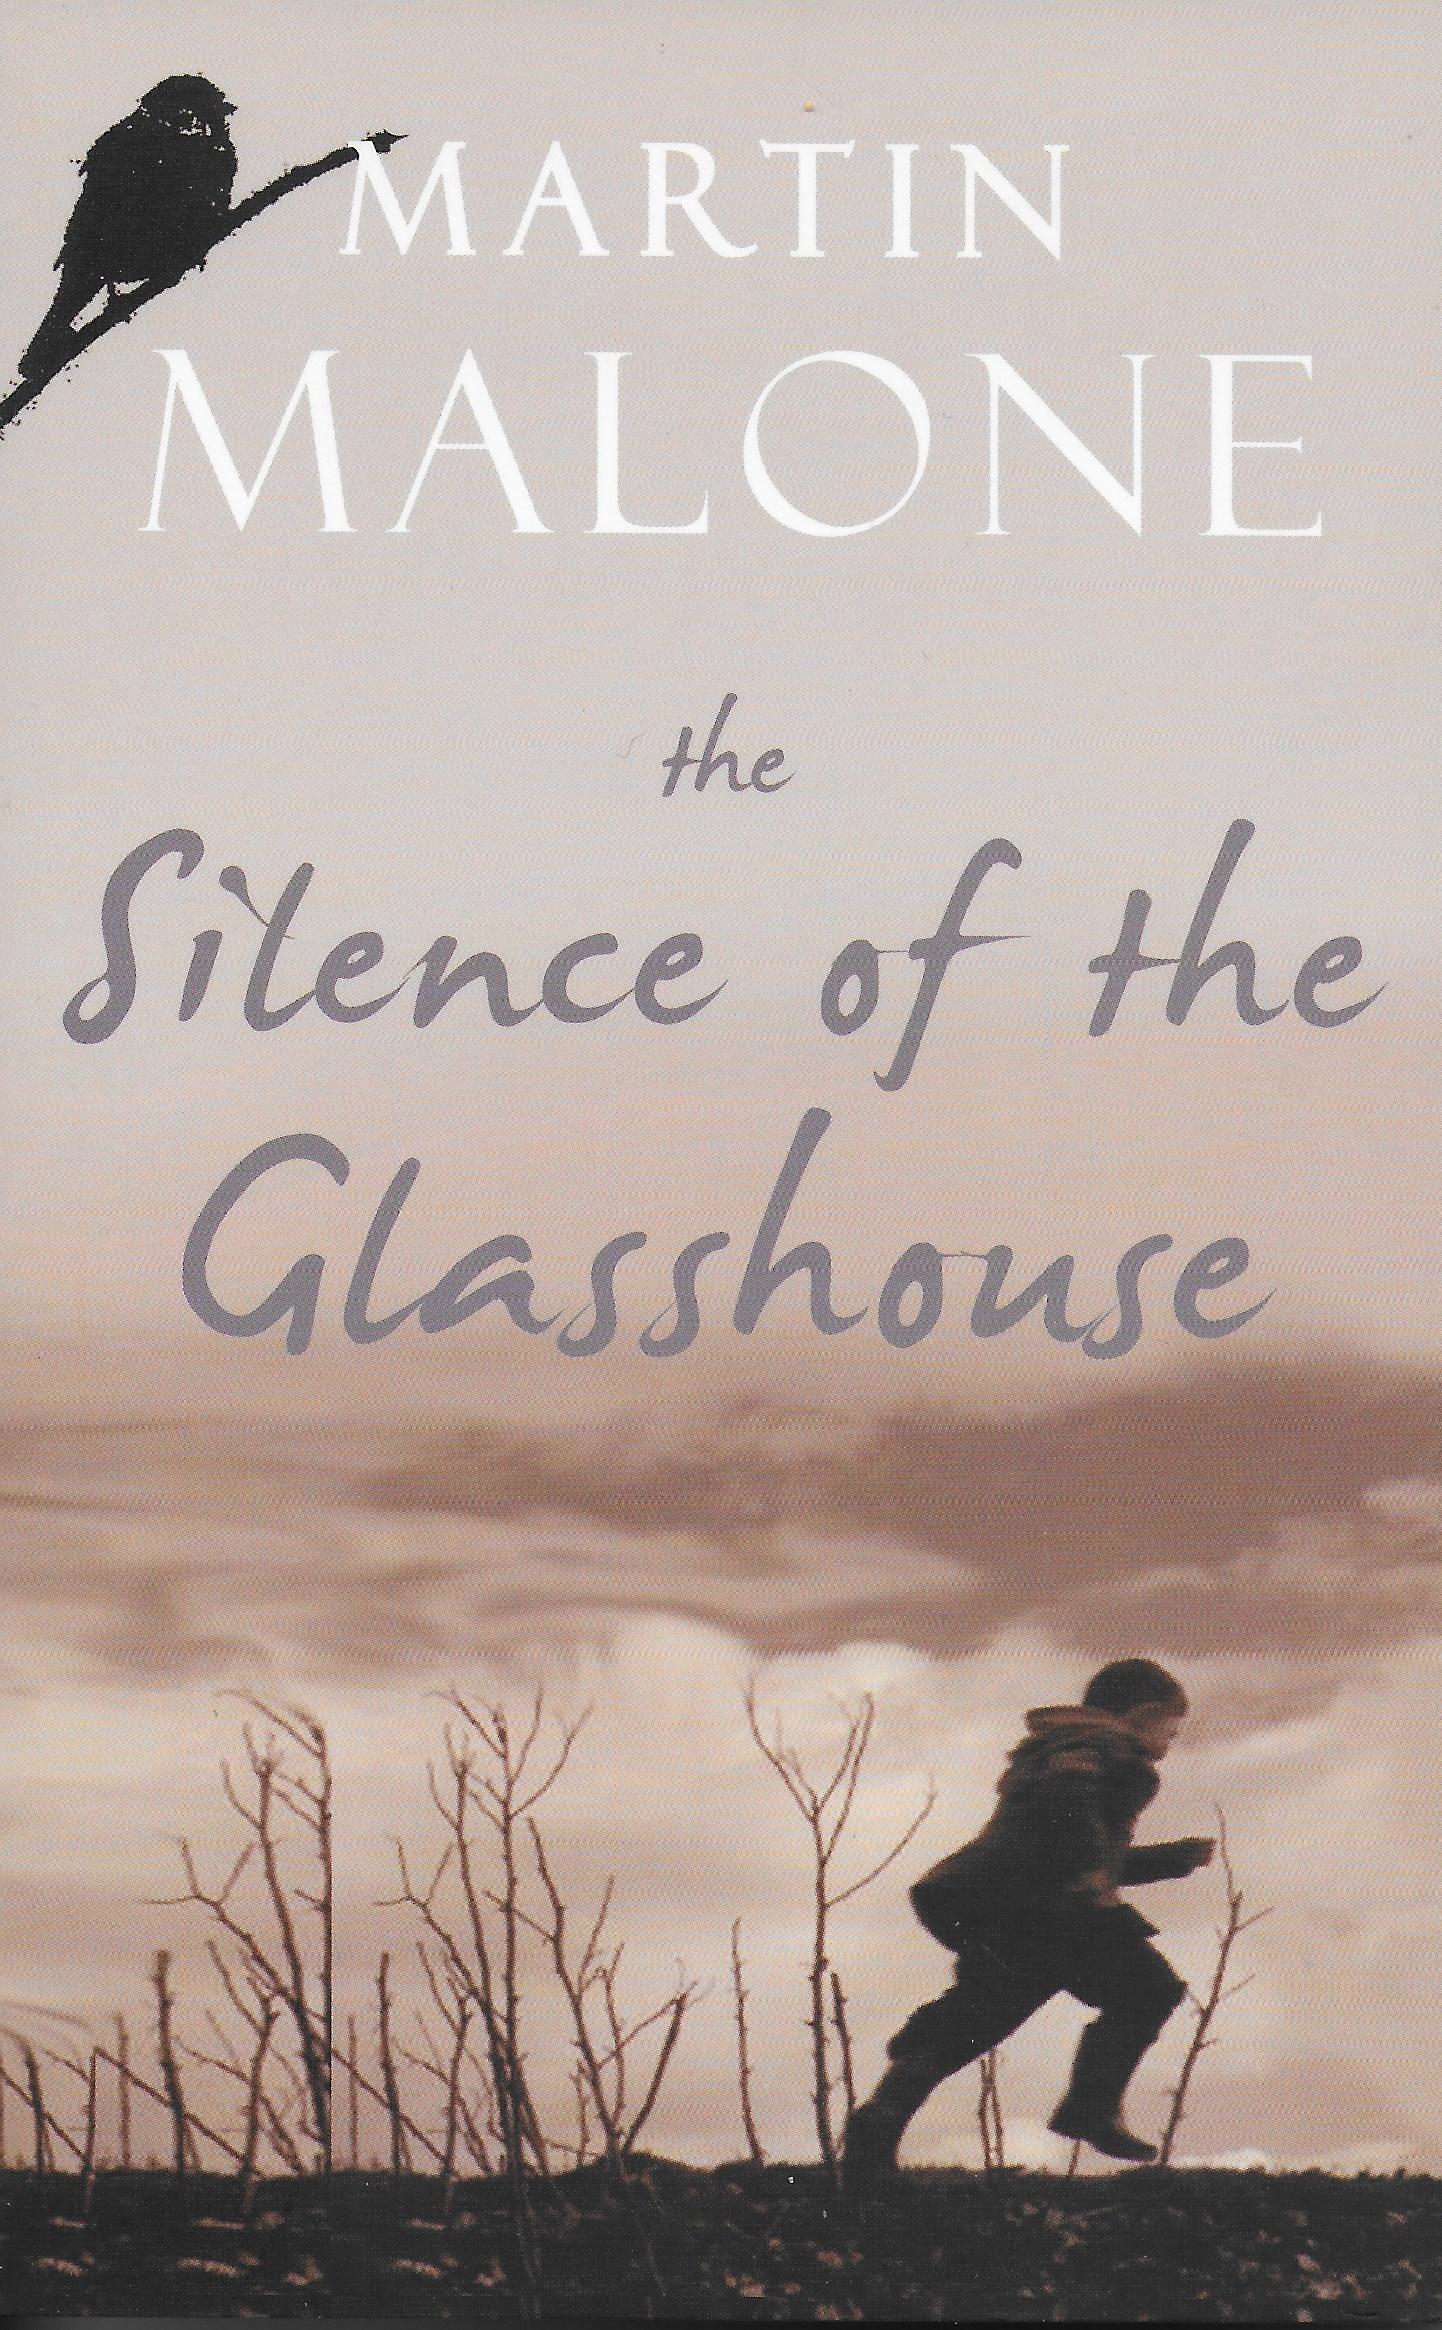 The Silence of the Glasshouse